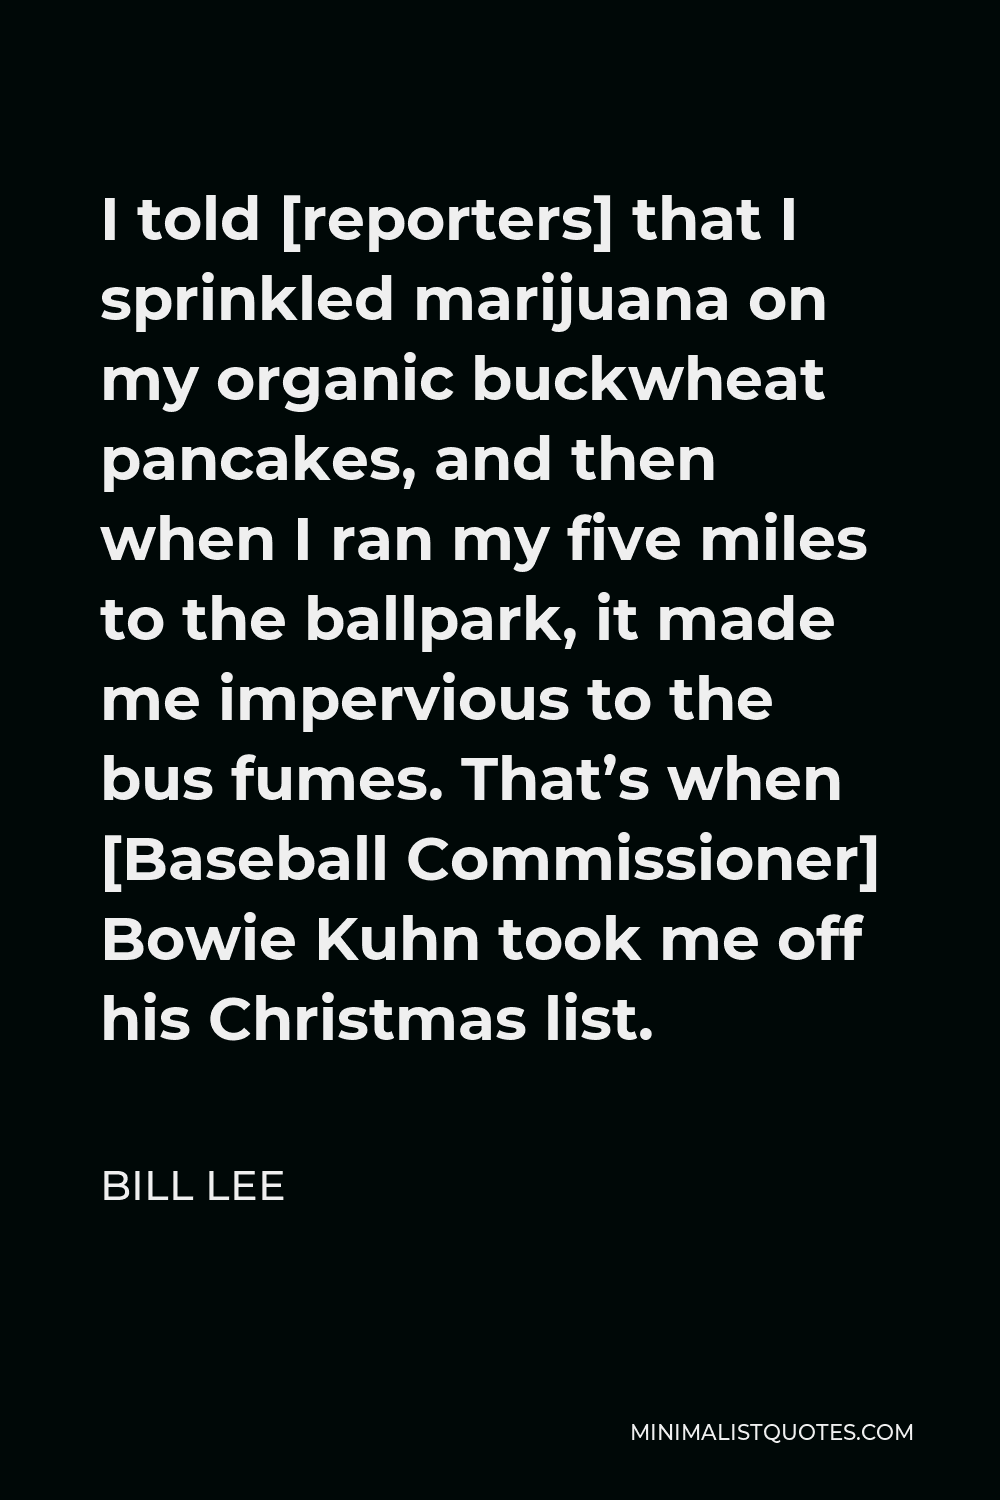 Bill Lee Quote - I told [reporters] that I sprinkled marijuana on my organic buckwheat pancakes, and then when I ran my five miles to the ballpark, it made me impervious to the bus fumes. That’s when [Baseball Commissioner] Bowie Kuhn took me off his Christmas list.